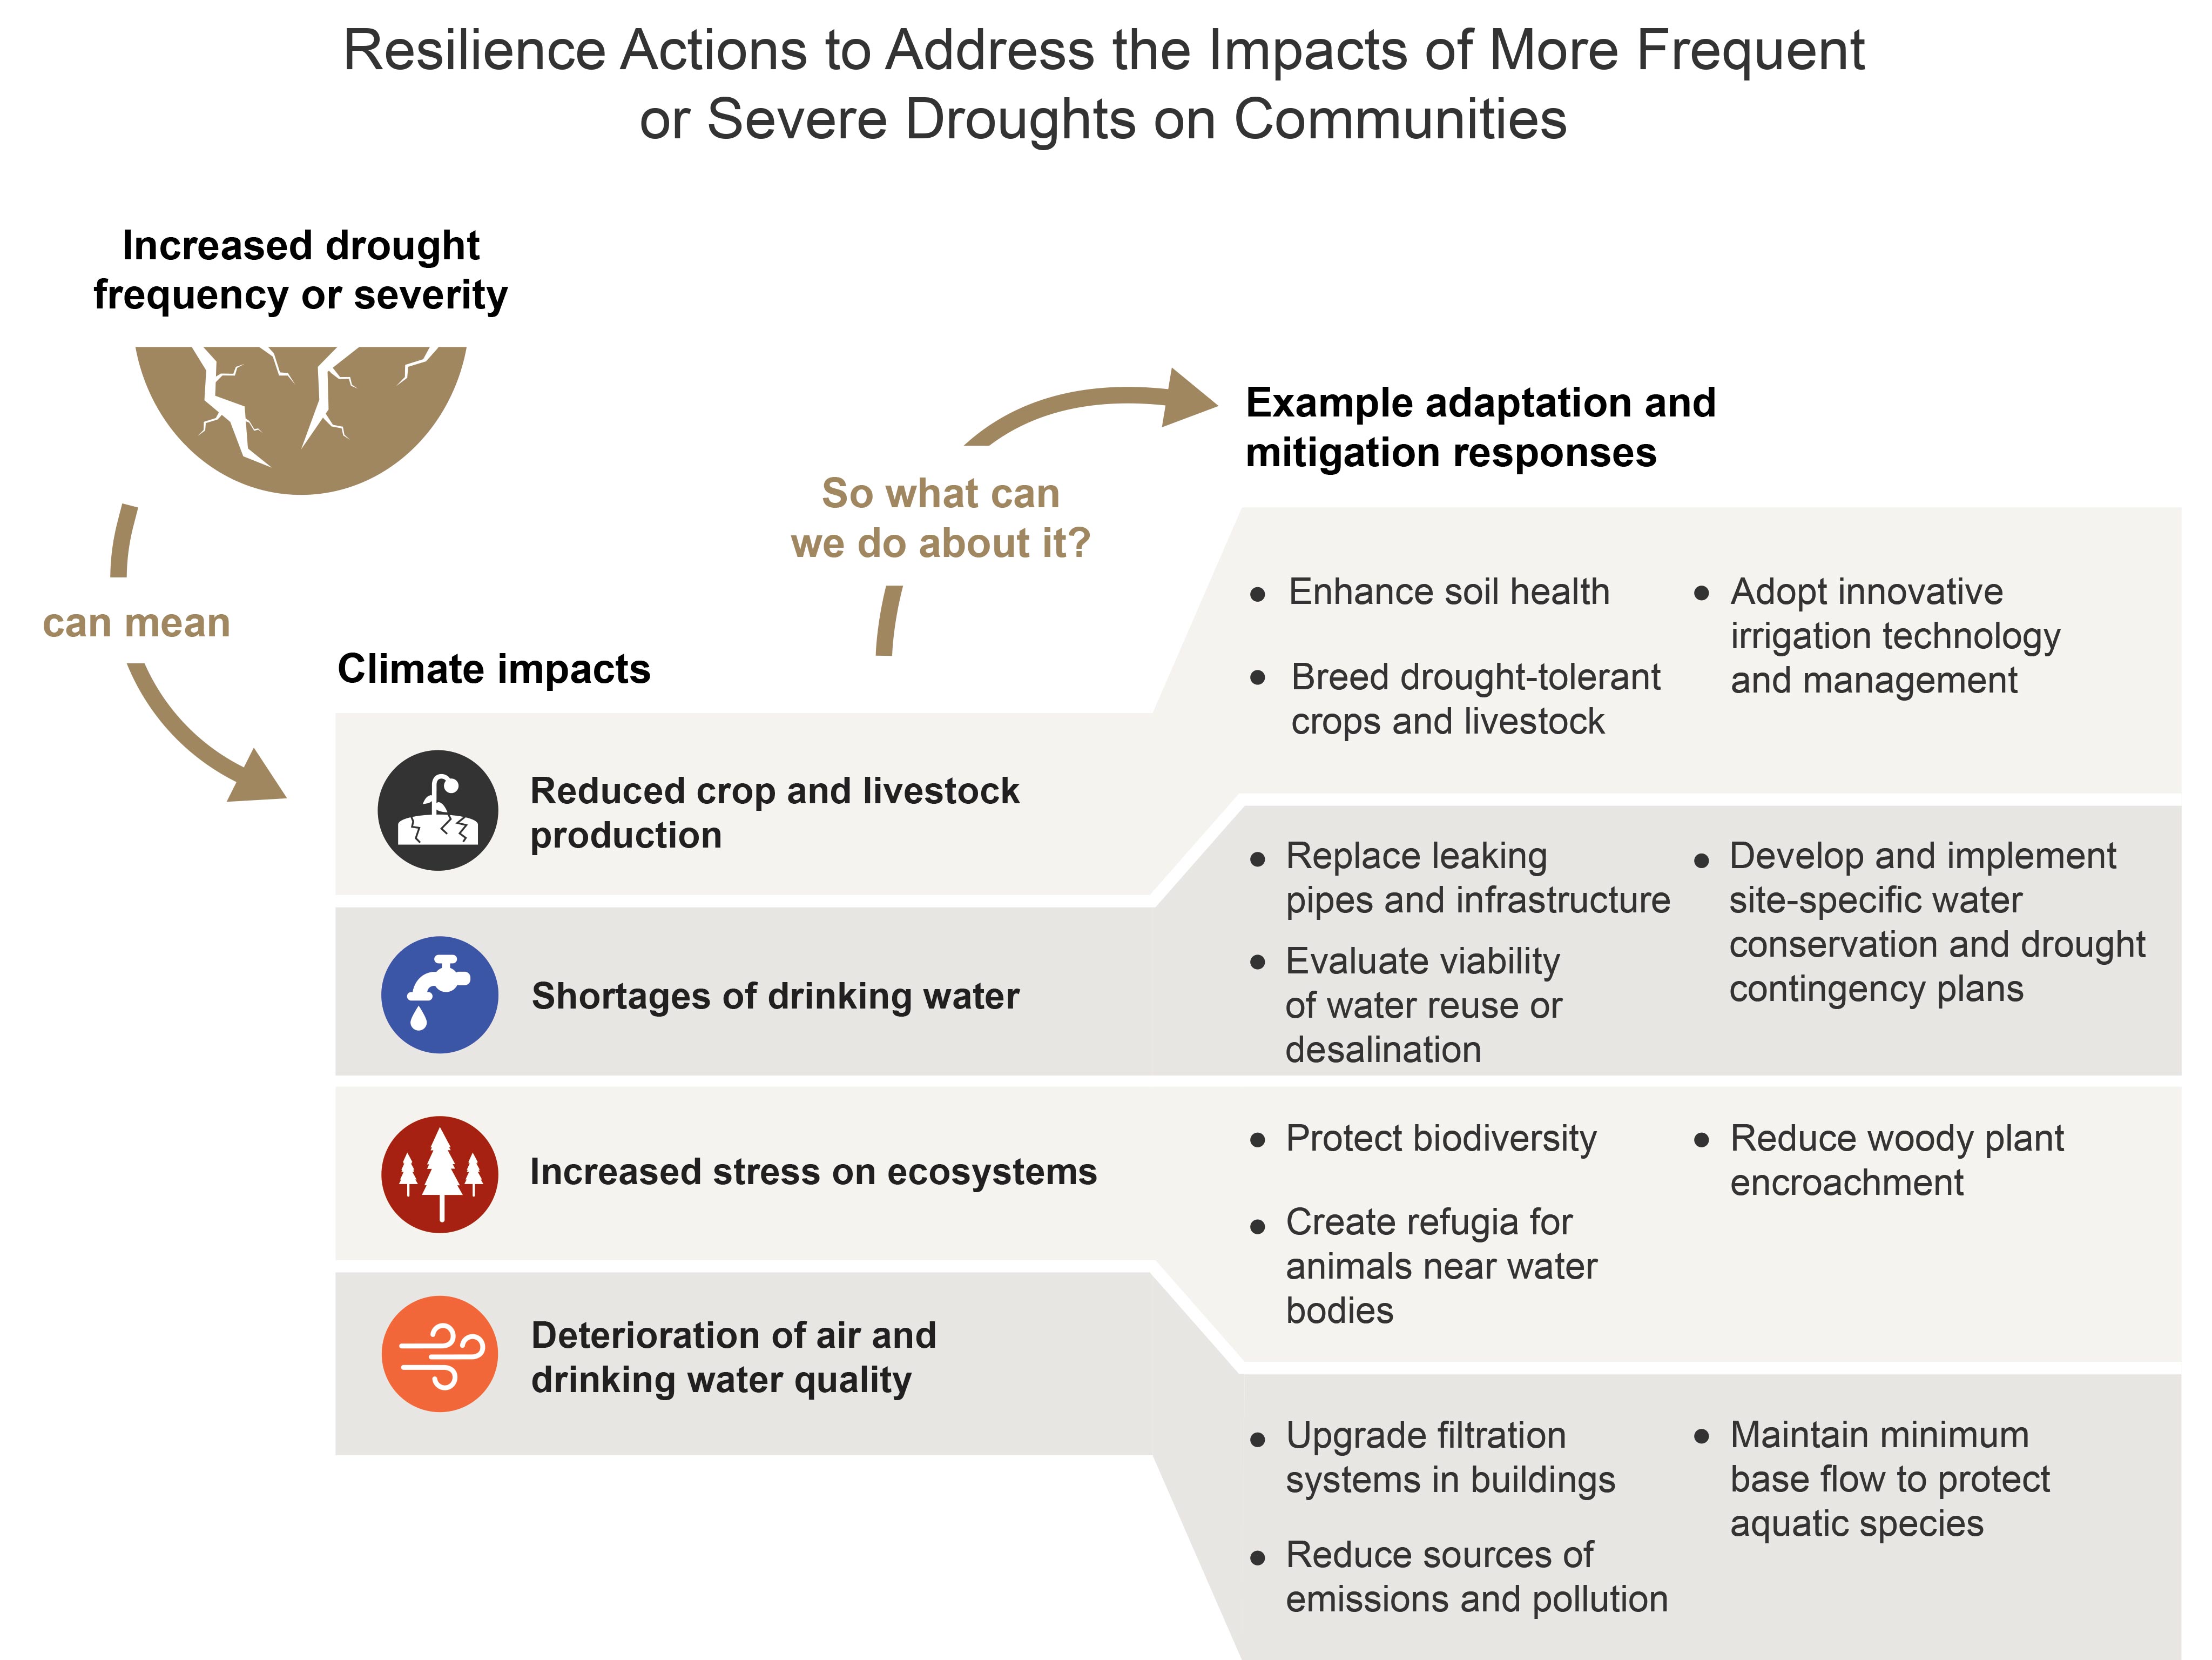 Resilience Actions to Address the Impacts of More Frequent or Severe Droughts on Communities